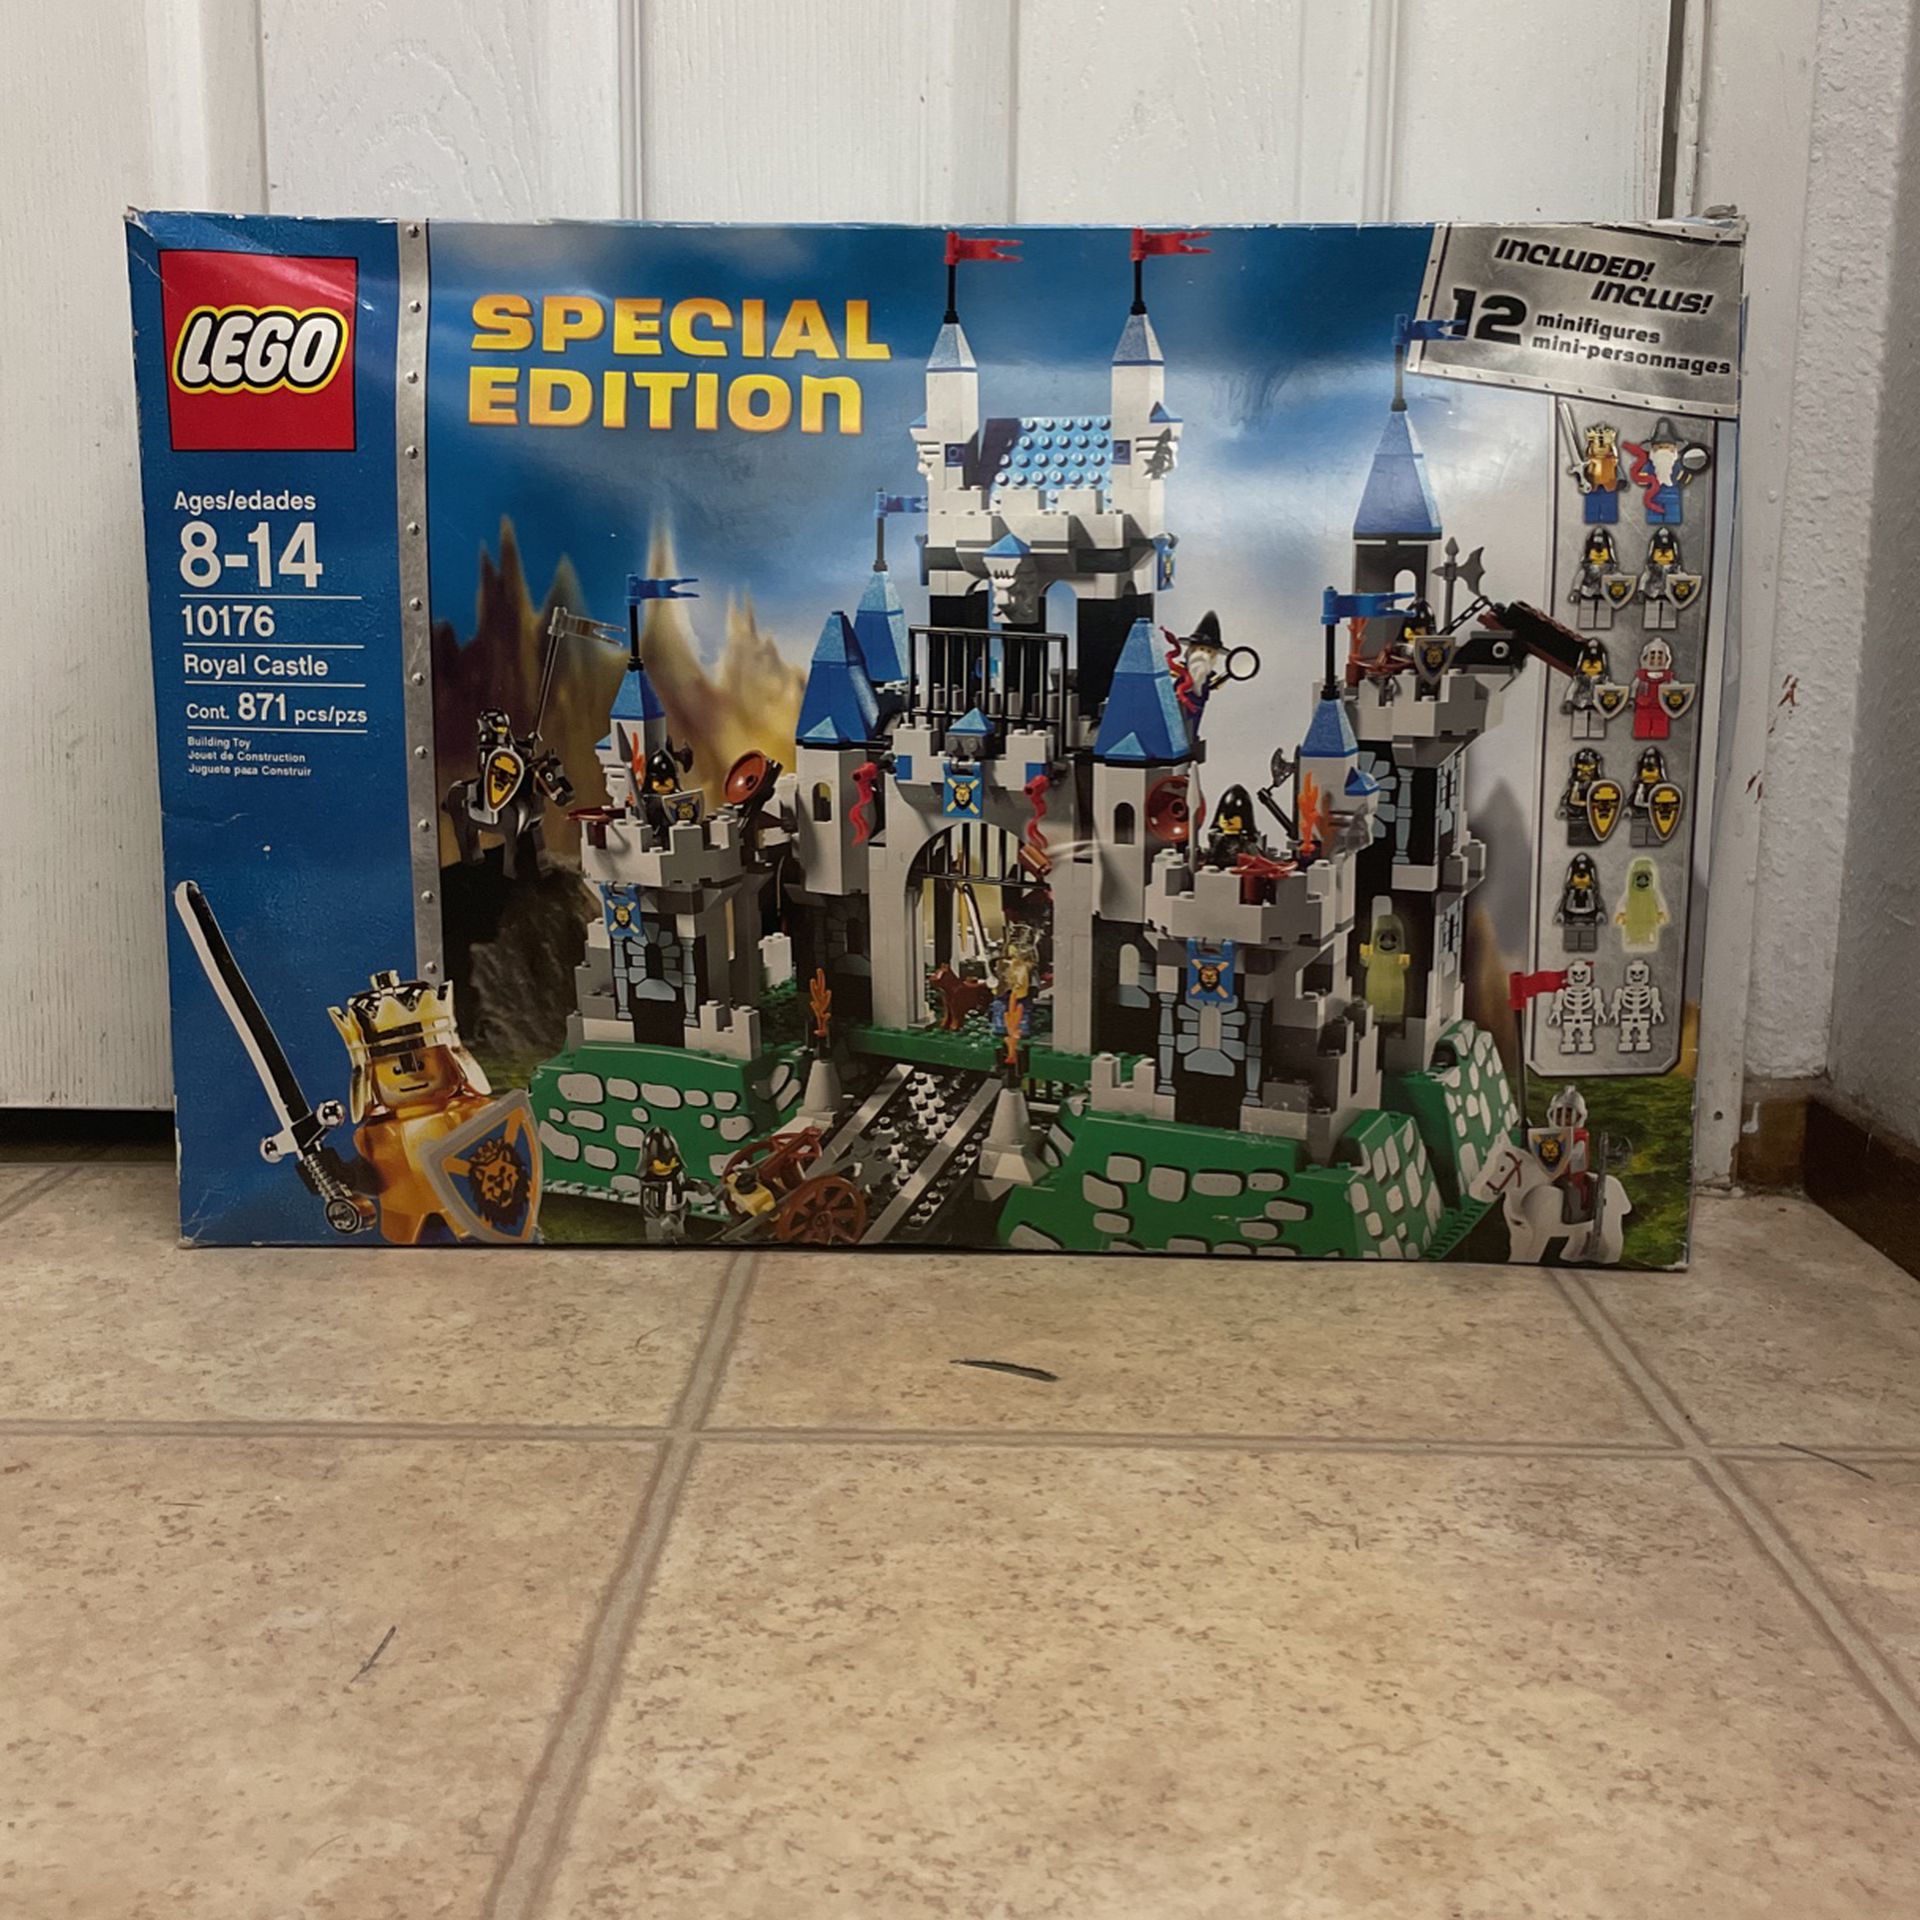 Lego Special Edition Royal Castle for in Hayward, CA - OfferUp